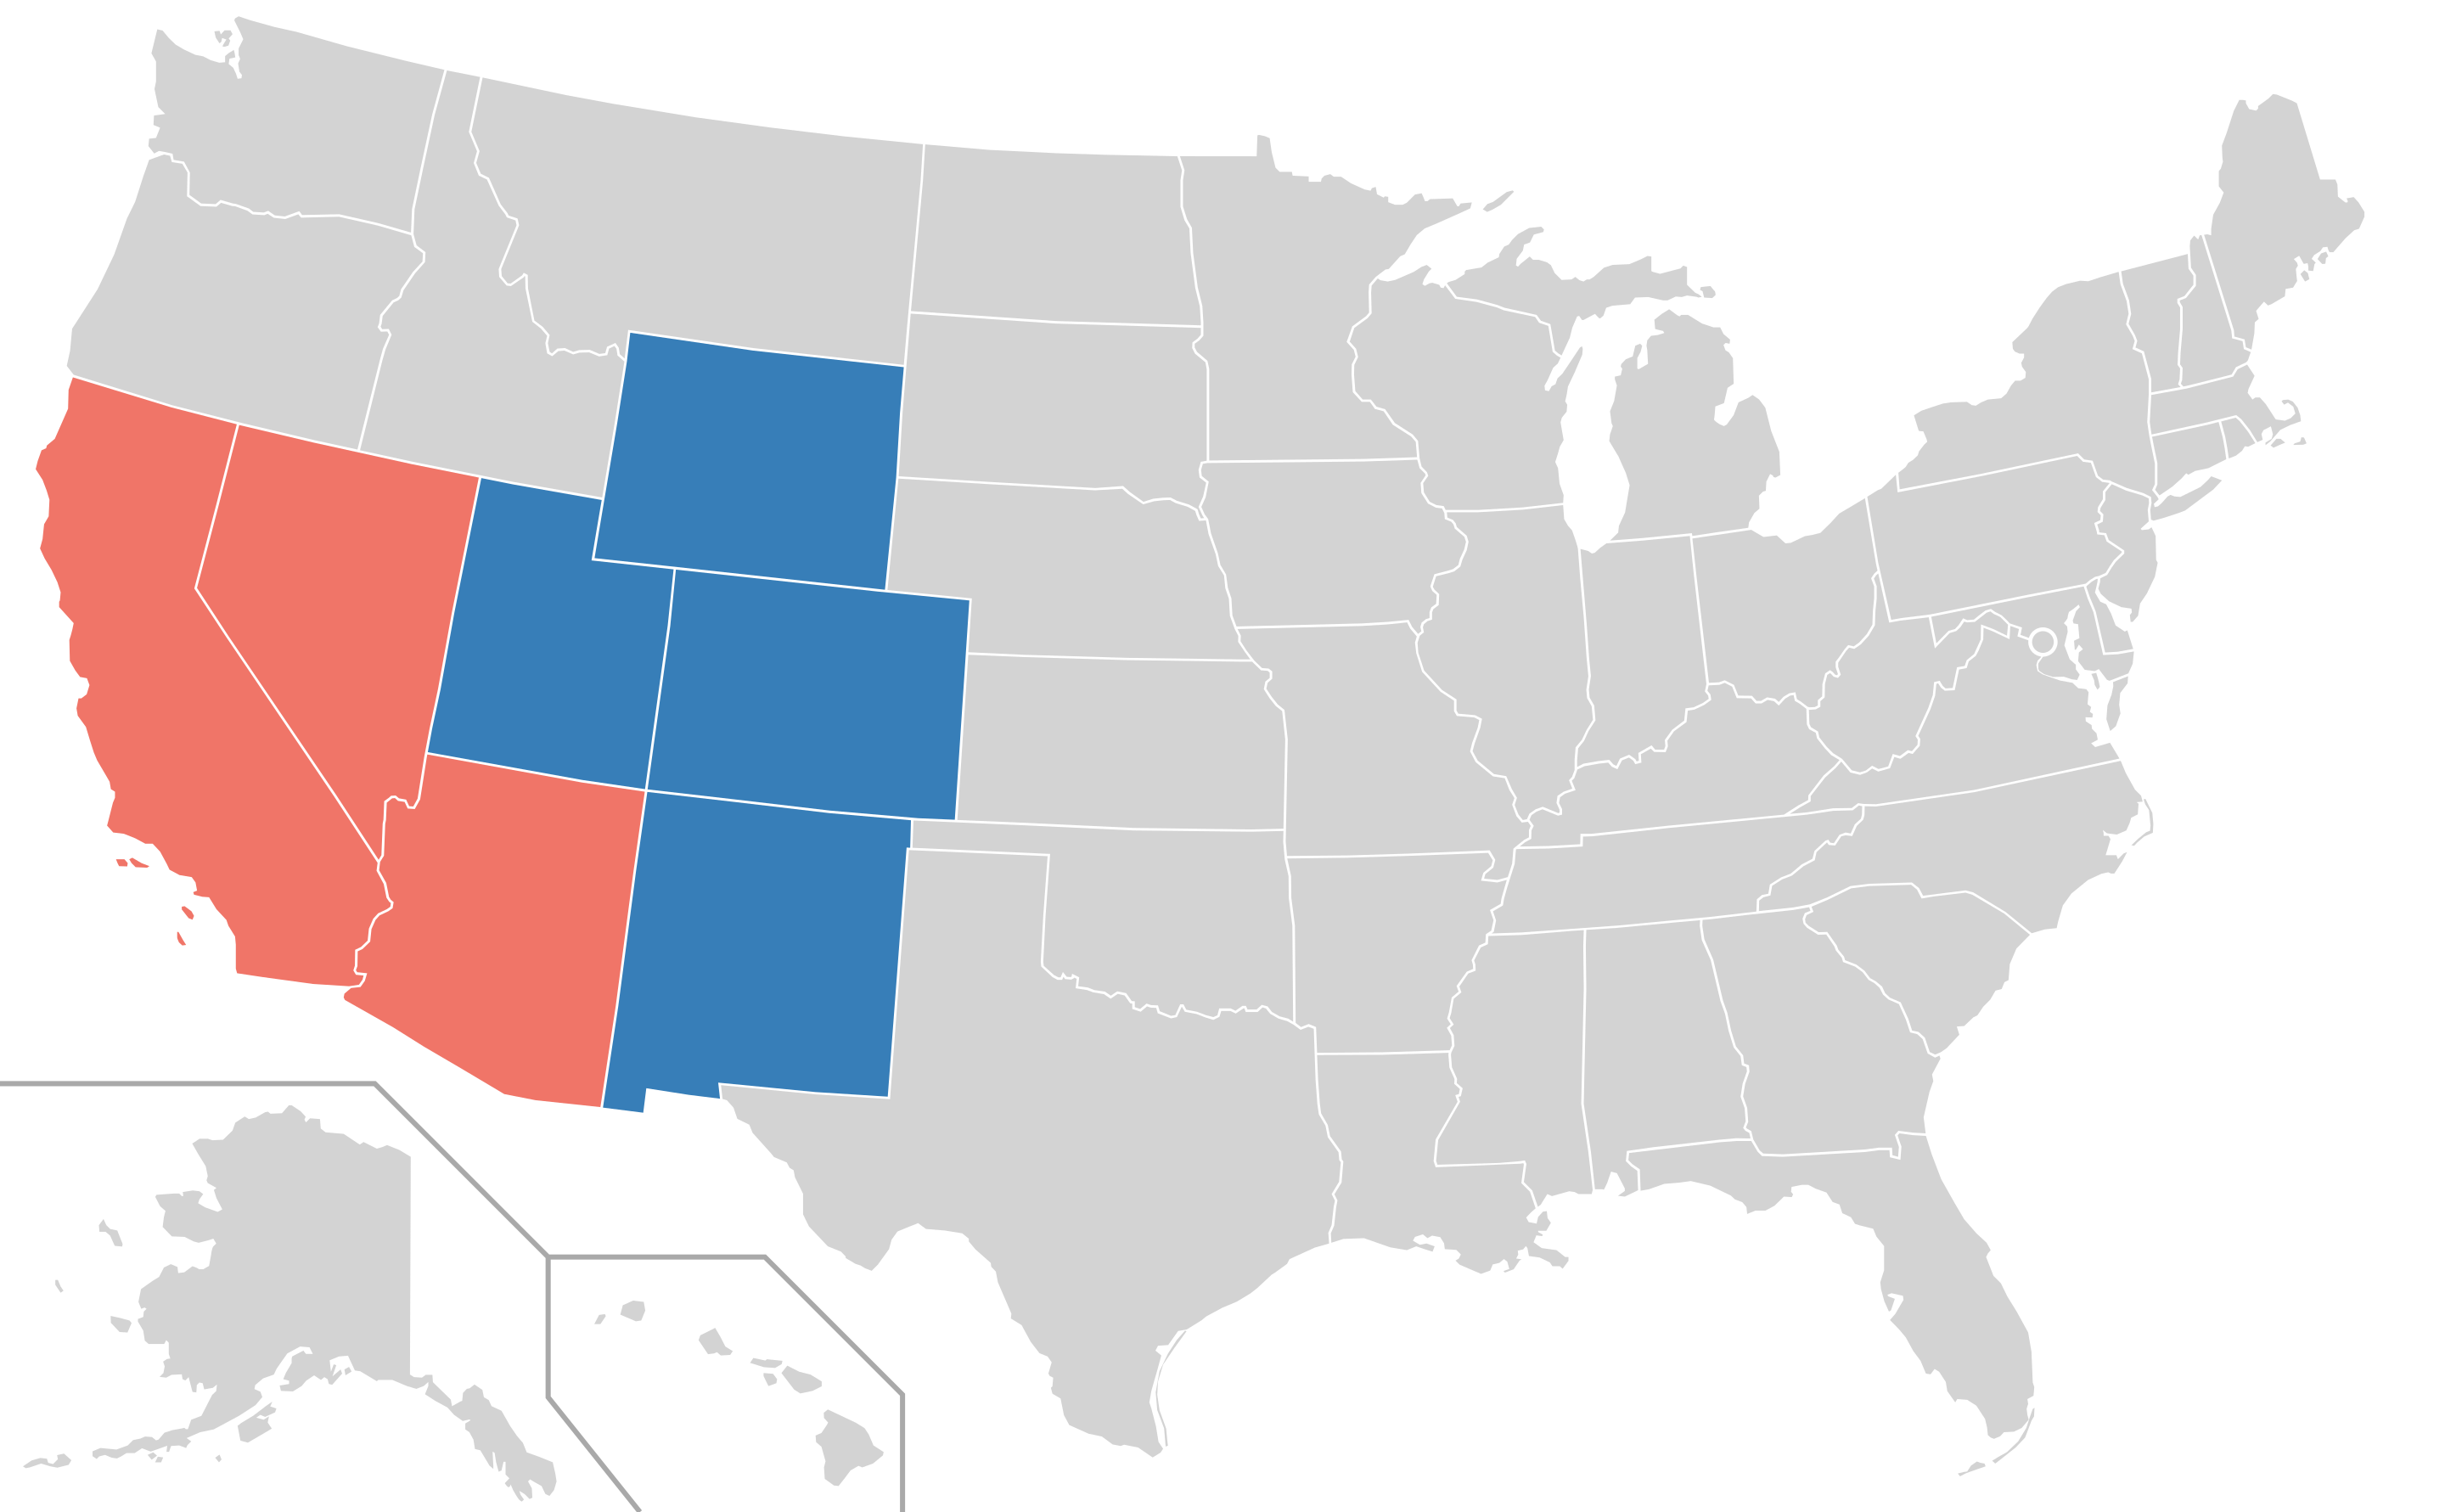 2880px-Colorado_River_Compact_states_map.svg.png